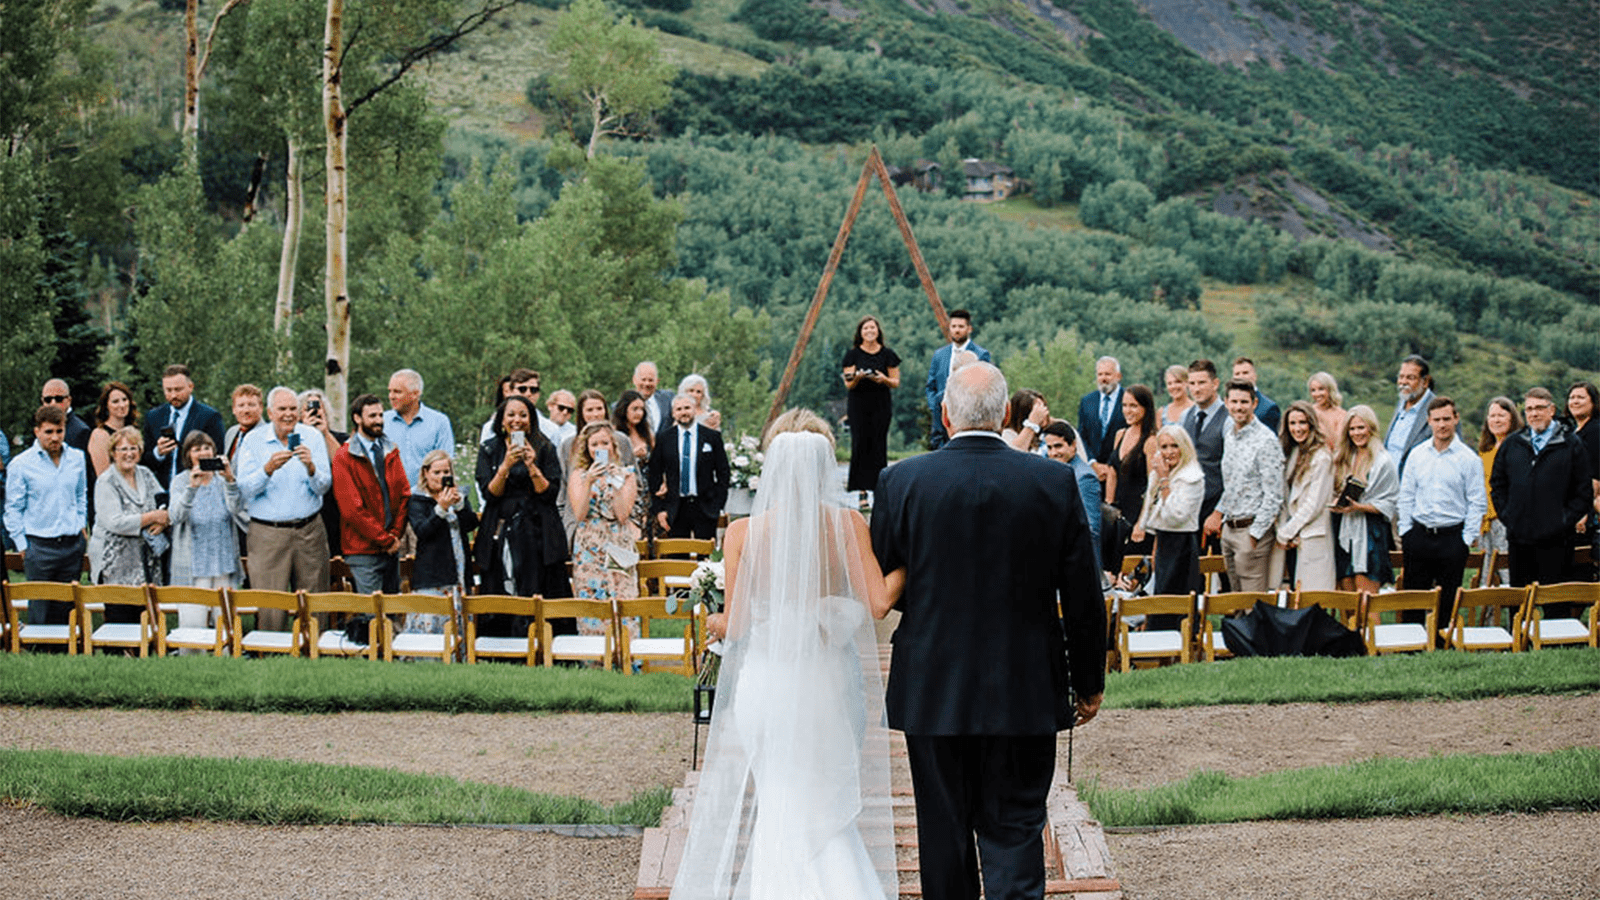 Bride walks down the isle with her father, guests look up at them from the seats